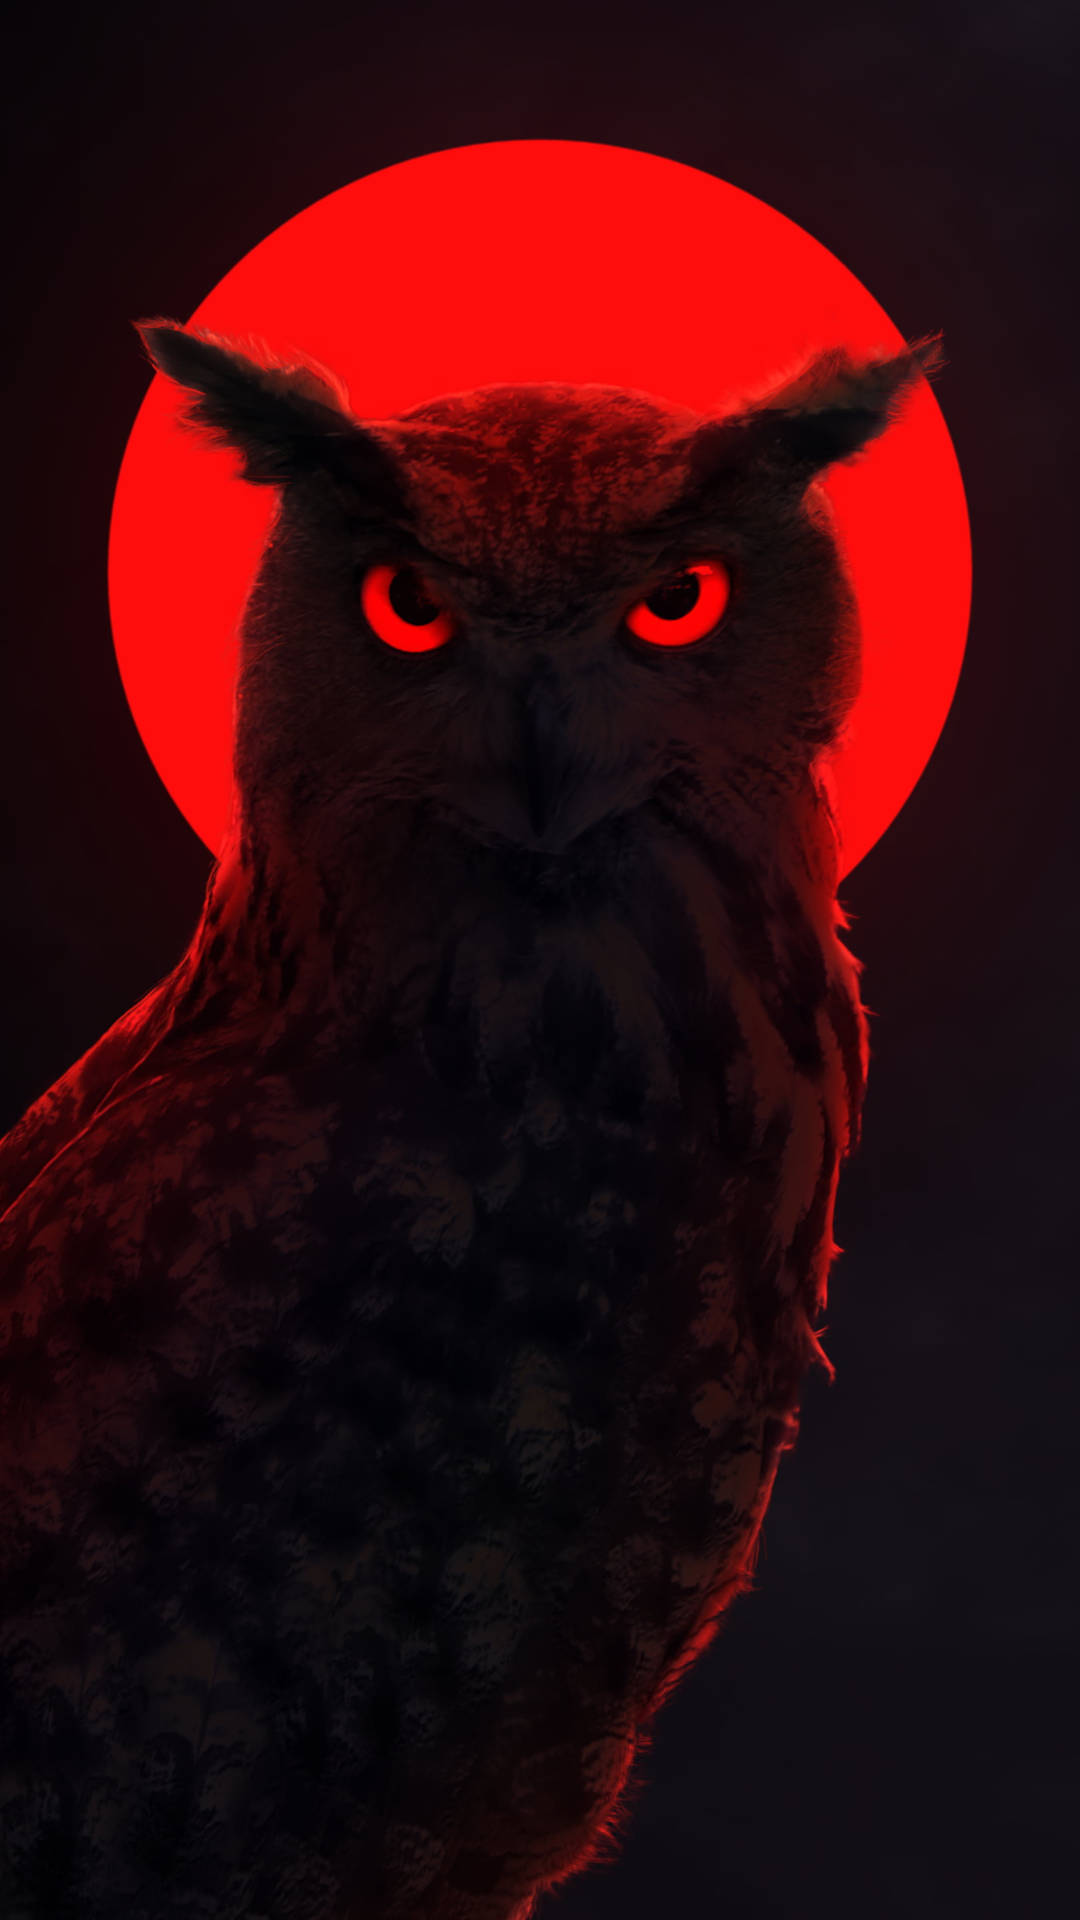 Mesmerizing Neon Moon with Red Owl - A Surreal Night Vision Wallpaper